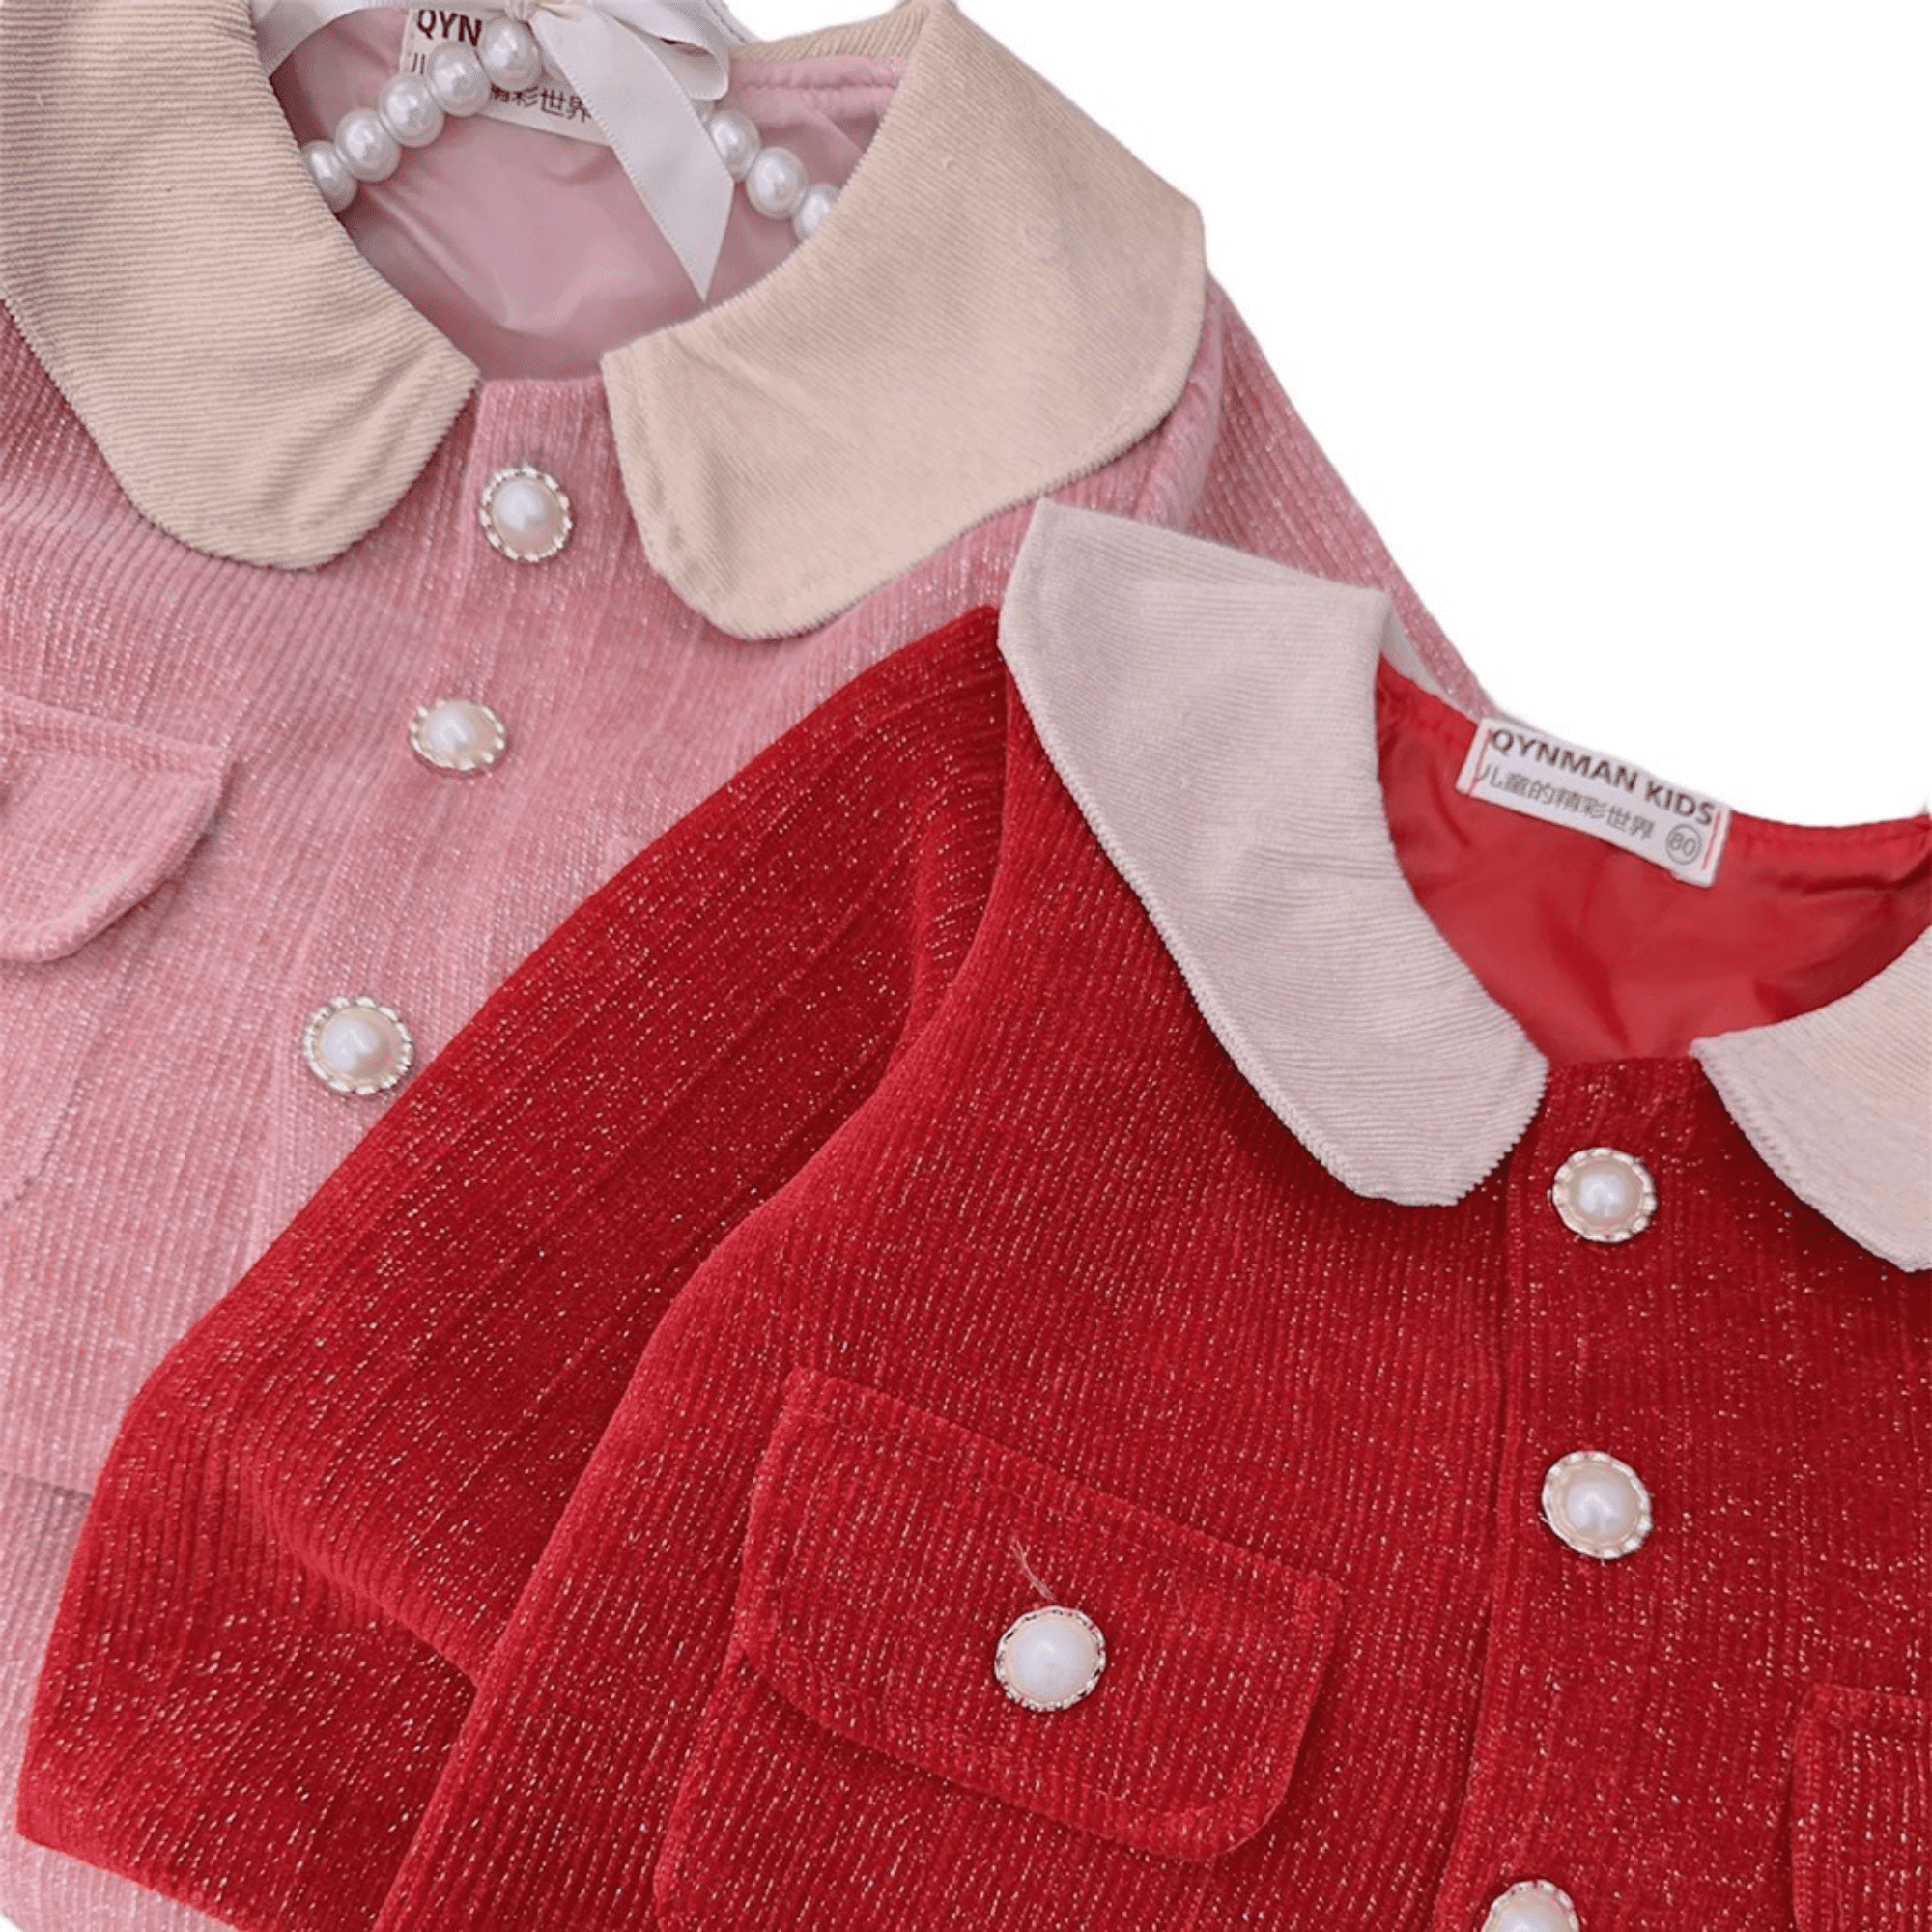 Kids Clothes Girls Factory Price 100% Wool Woolen Set Casual Each One In Opp Bag From Vietnam Manufacturer 15